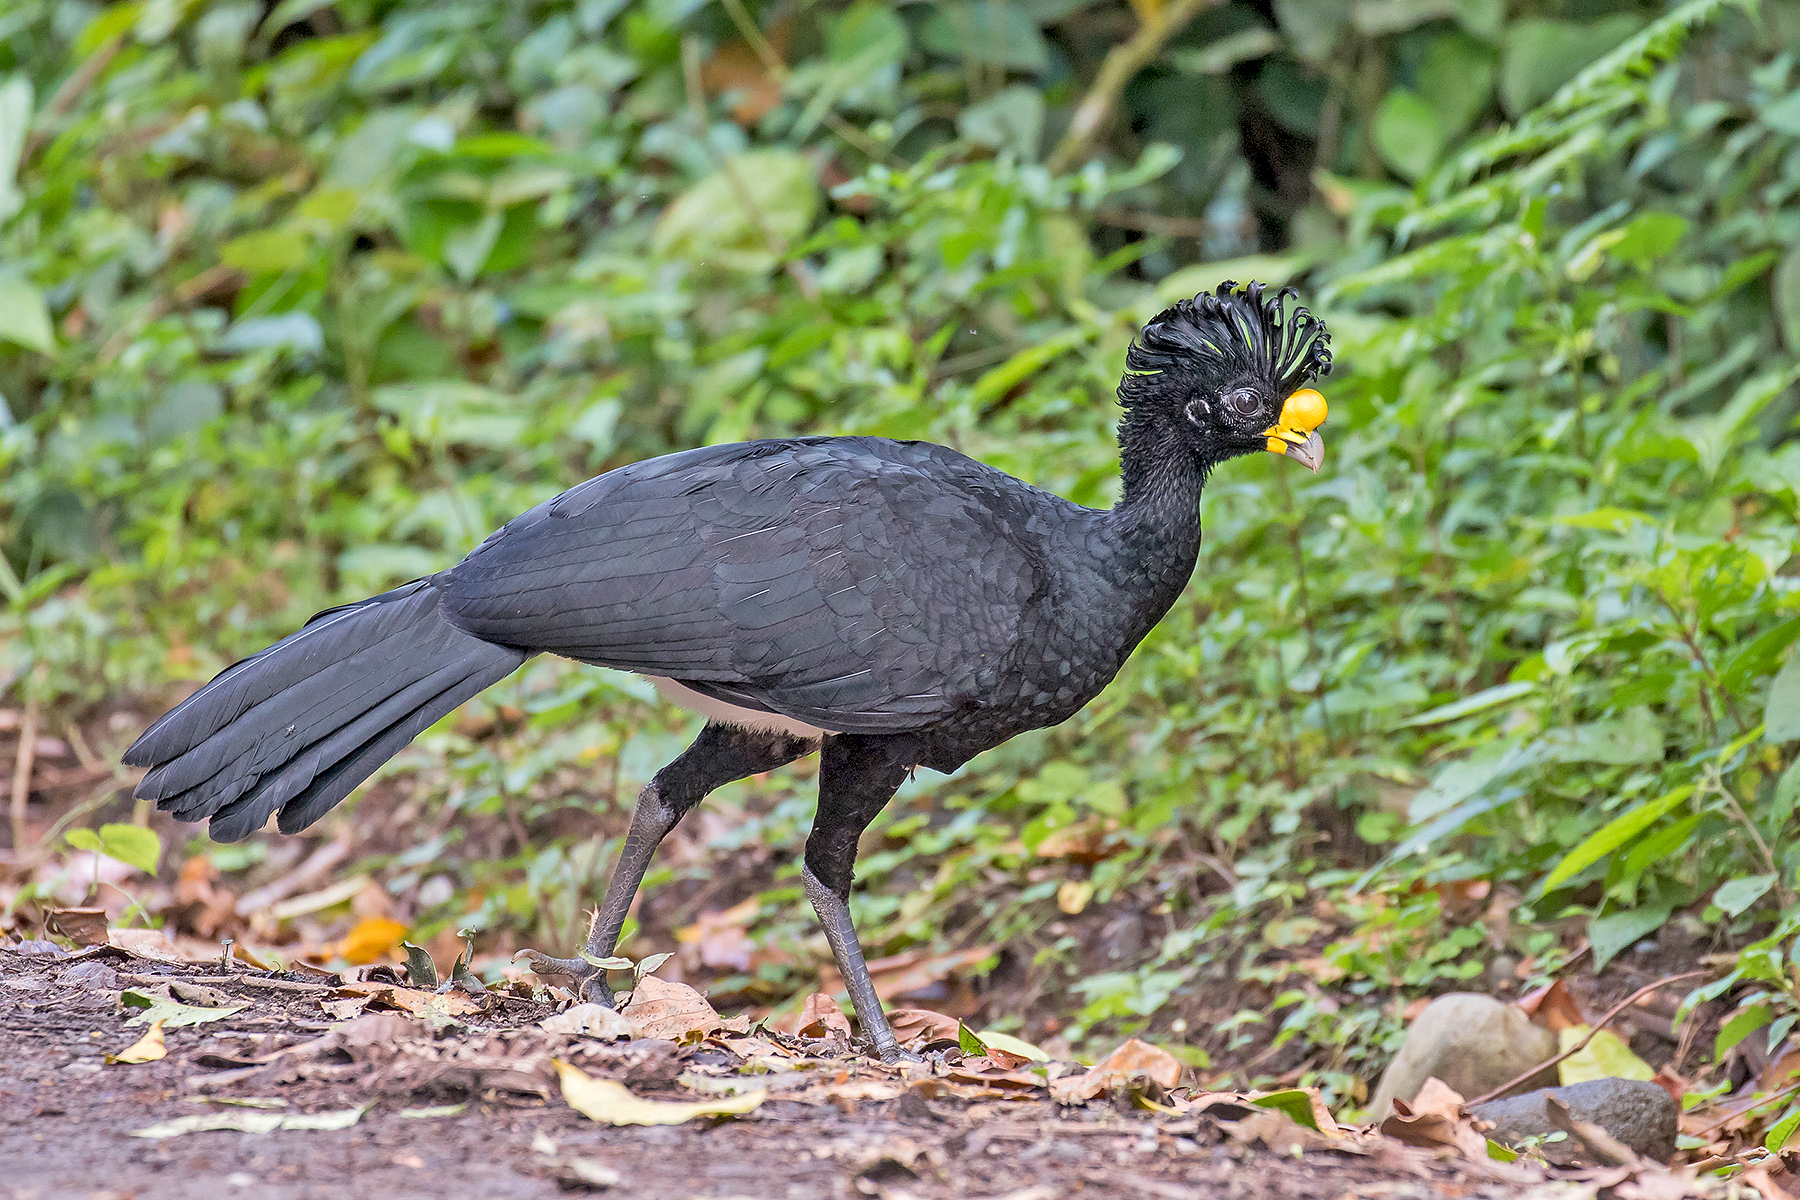 Great Curassow (image by Pete Morris)